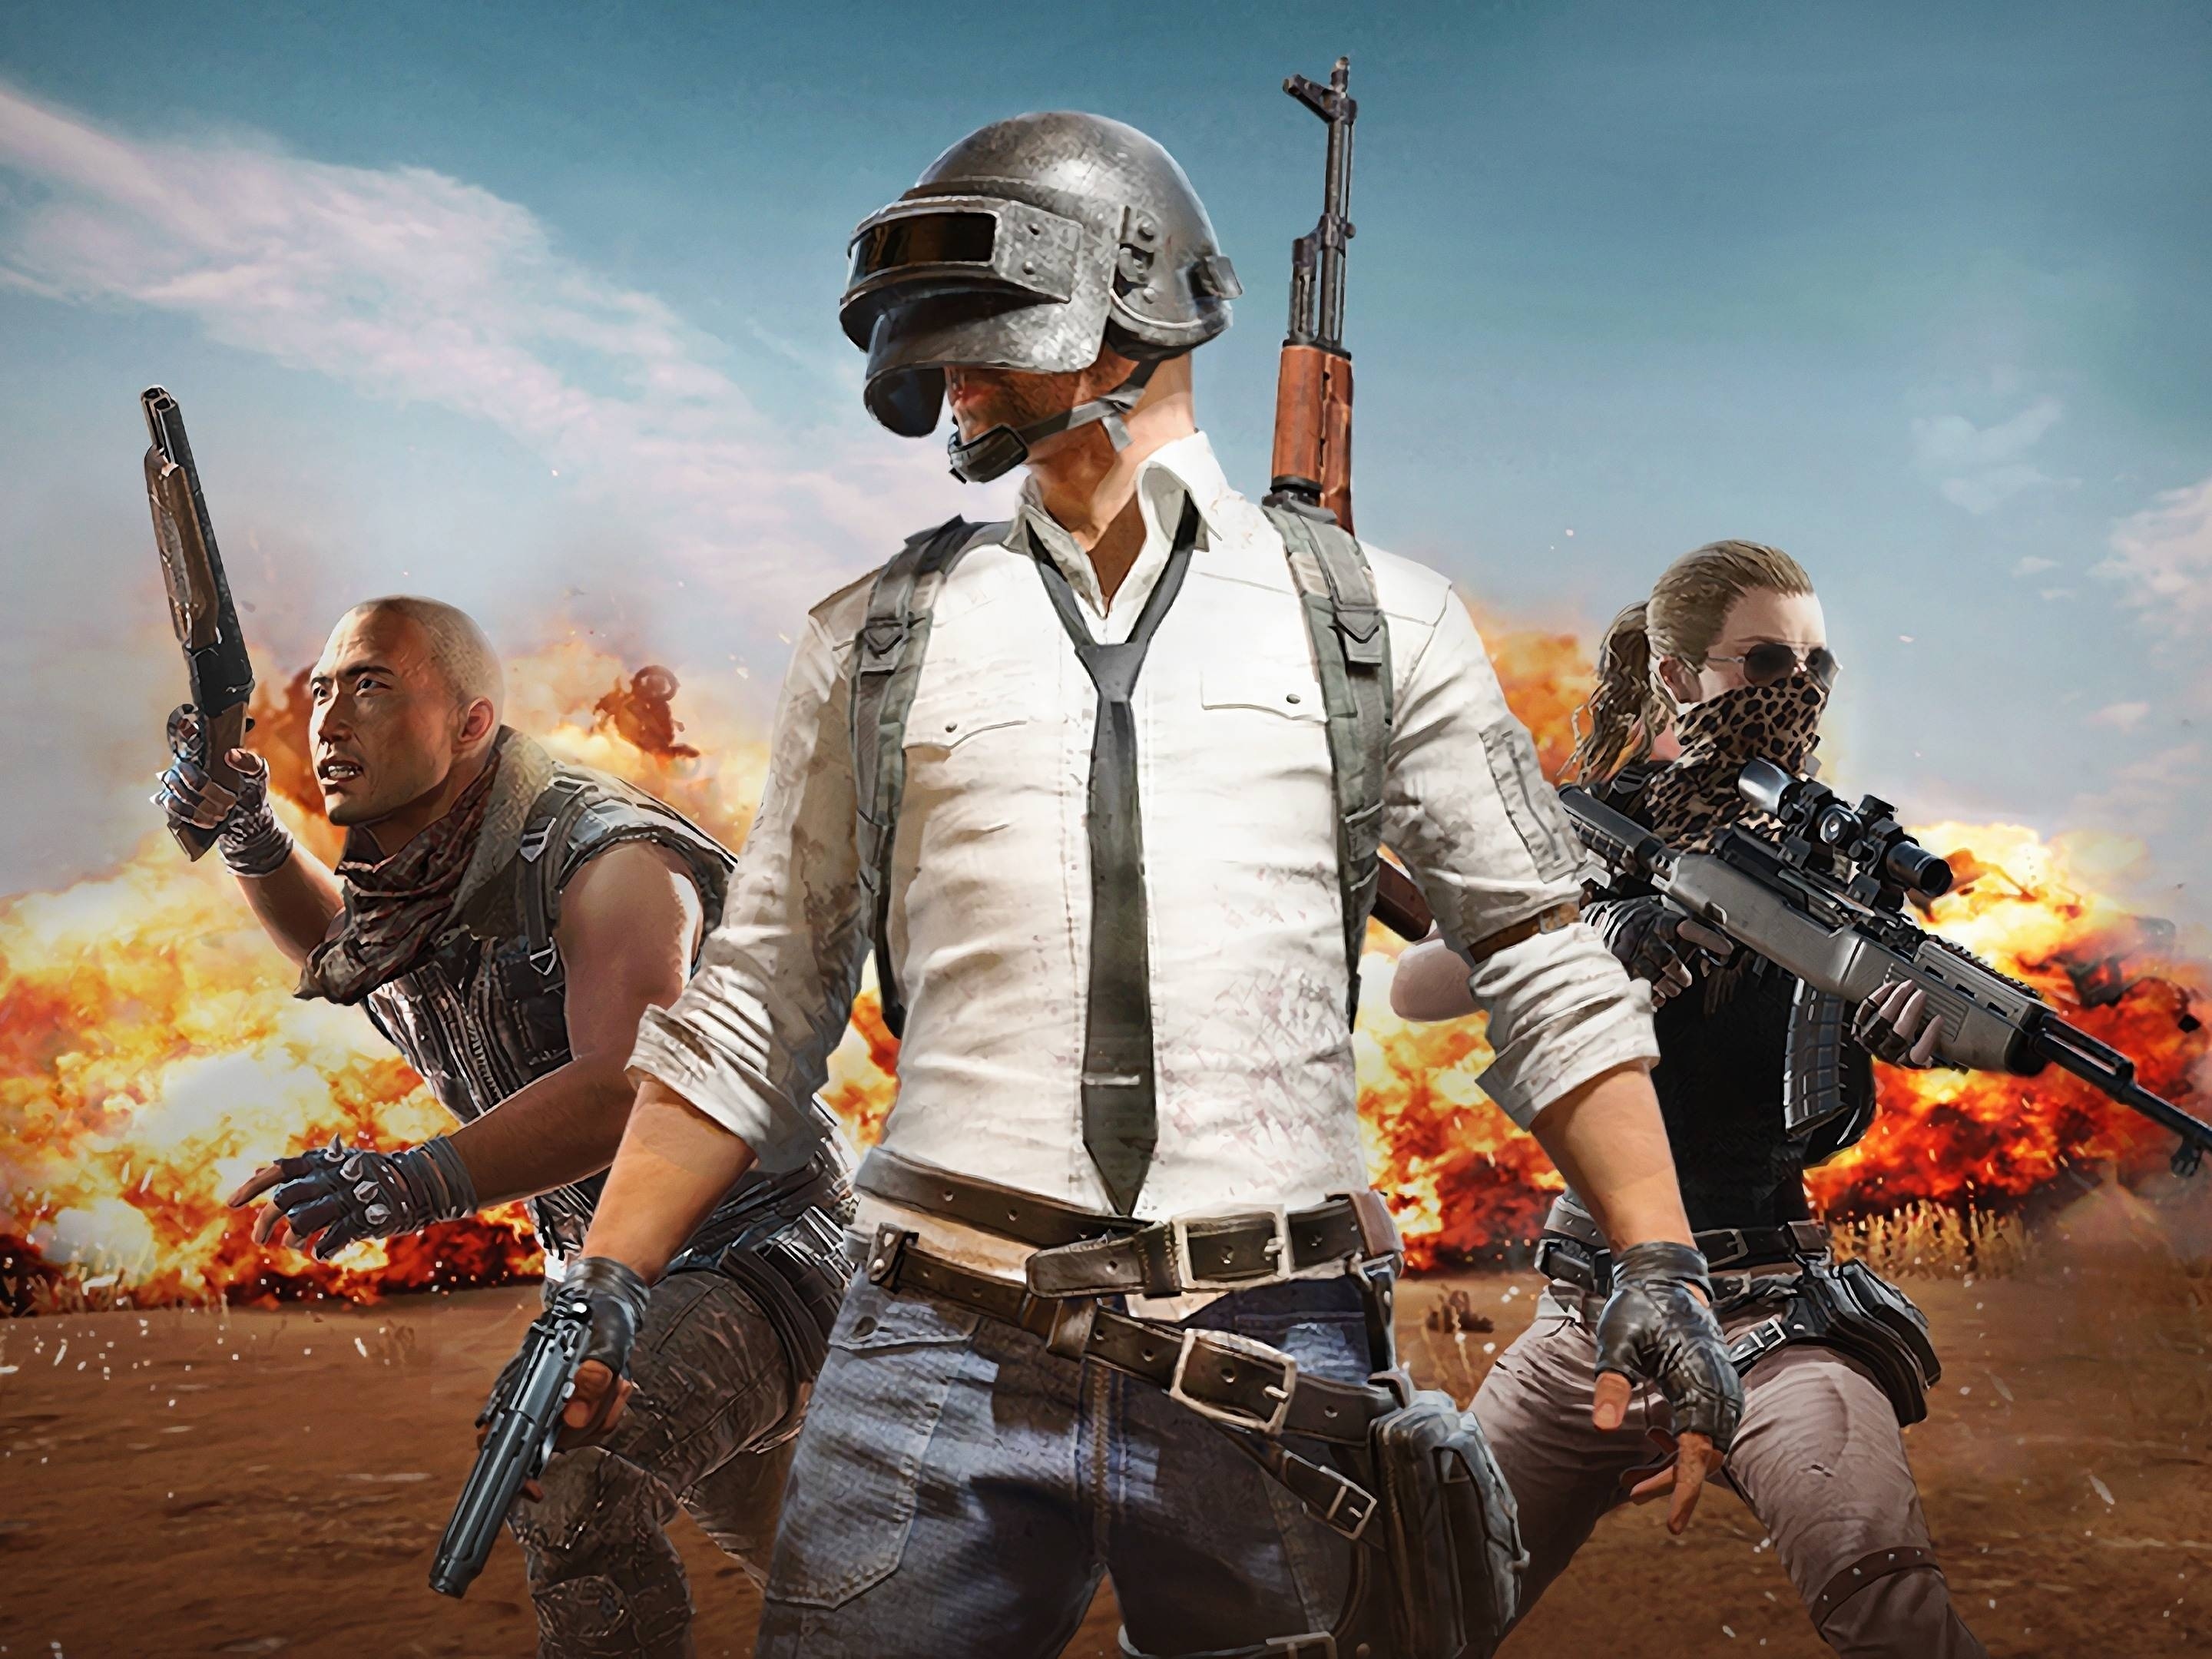 Pubg Royale 2020 4k Wallpaper for iphone and 4K Gaming wallpapers for  laptop download now for …